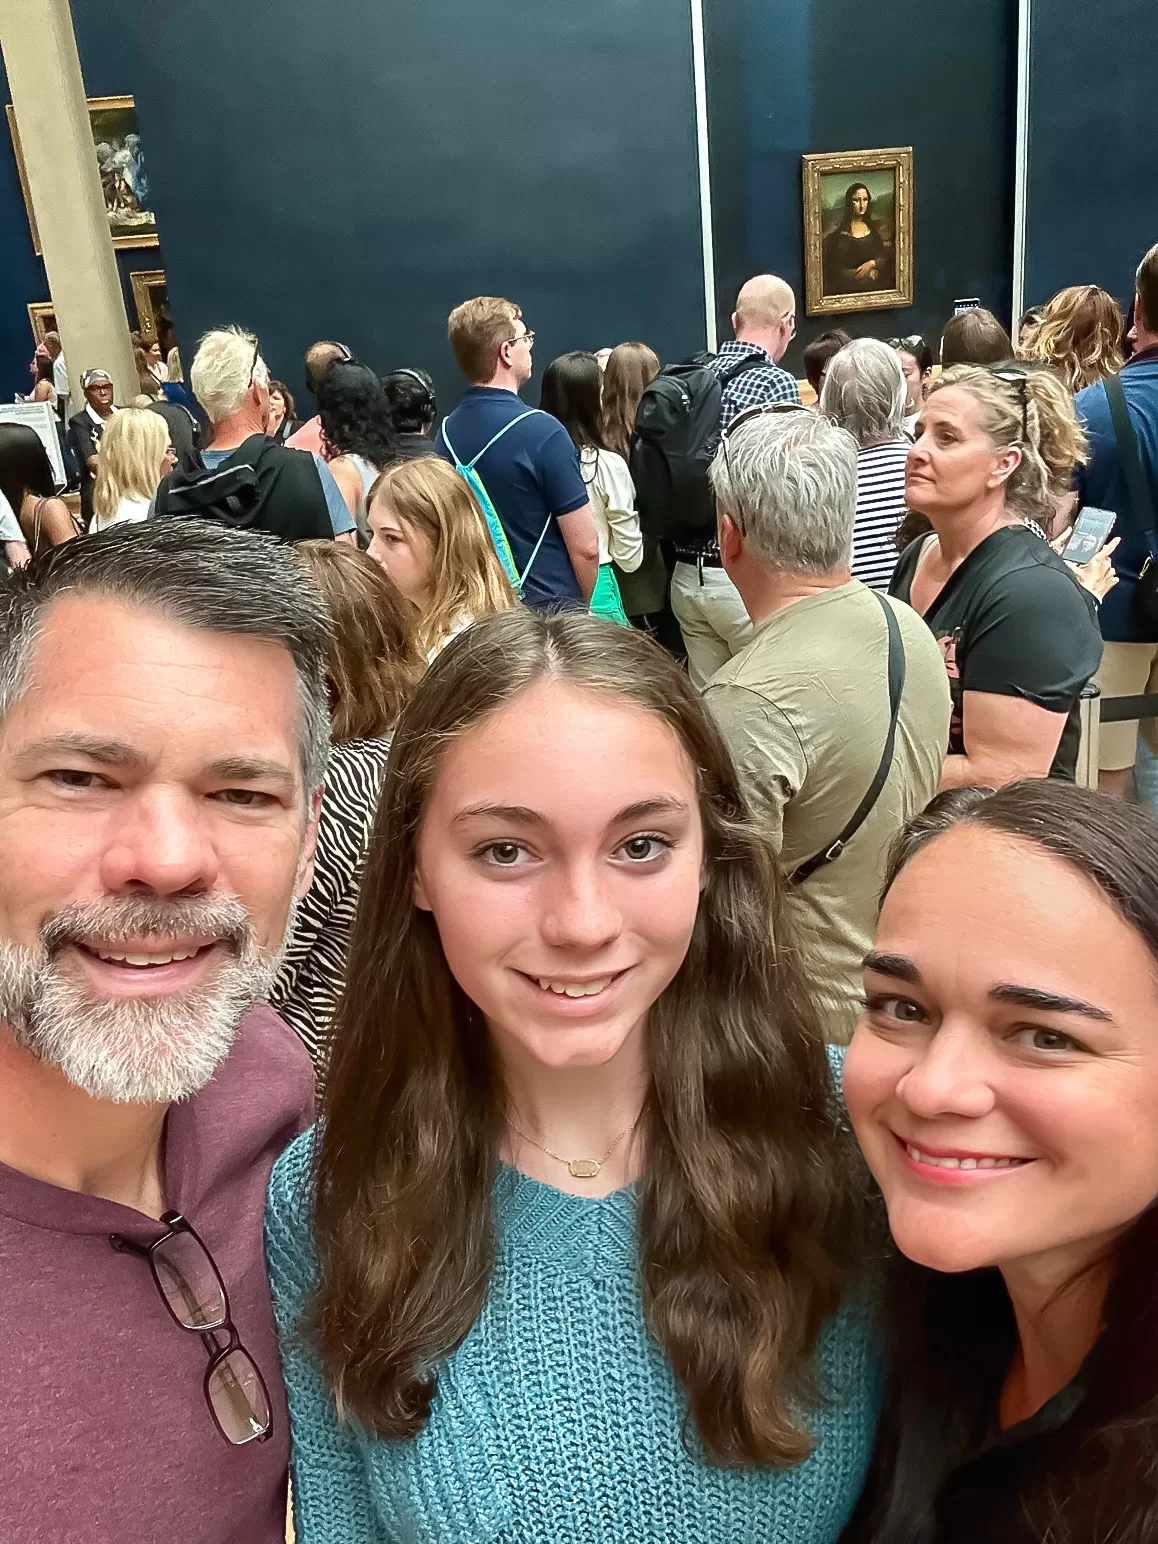 is the mona lisa worth it? Photos of a family at the mona lisa